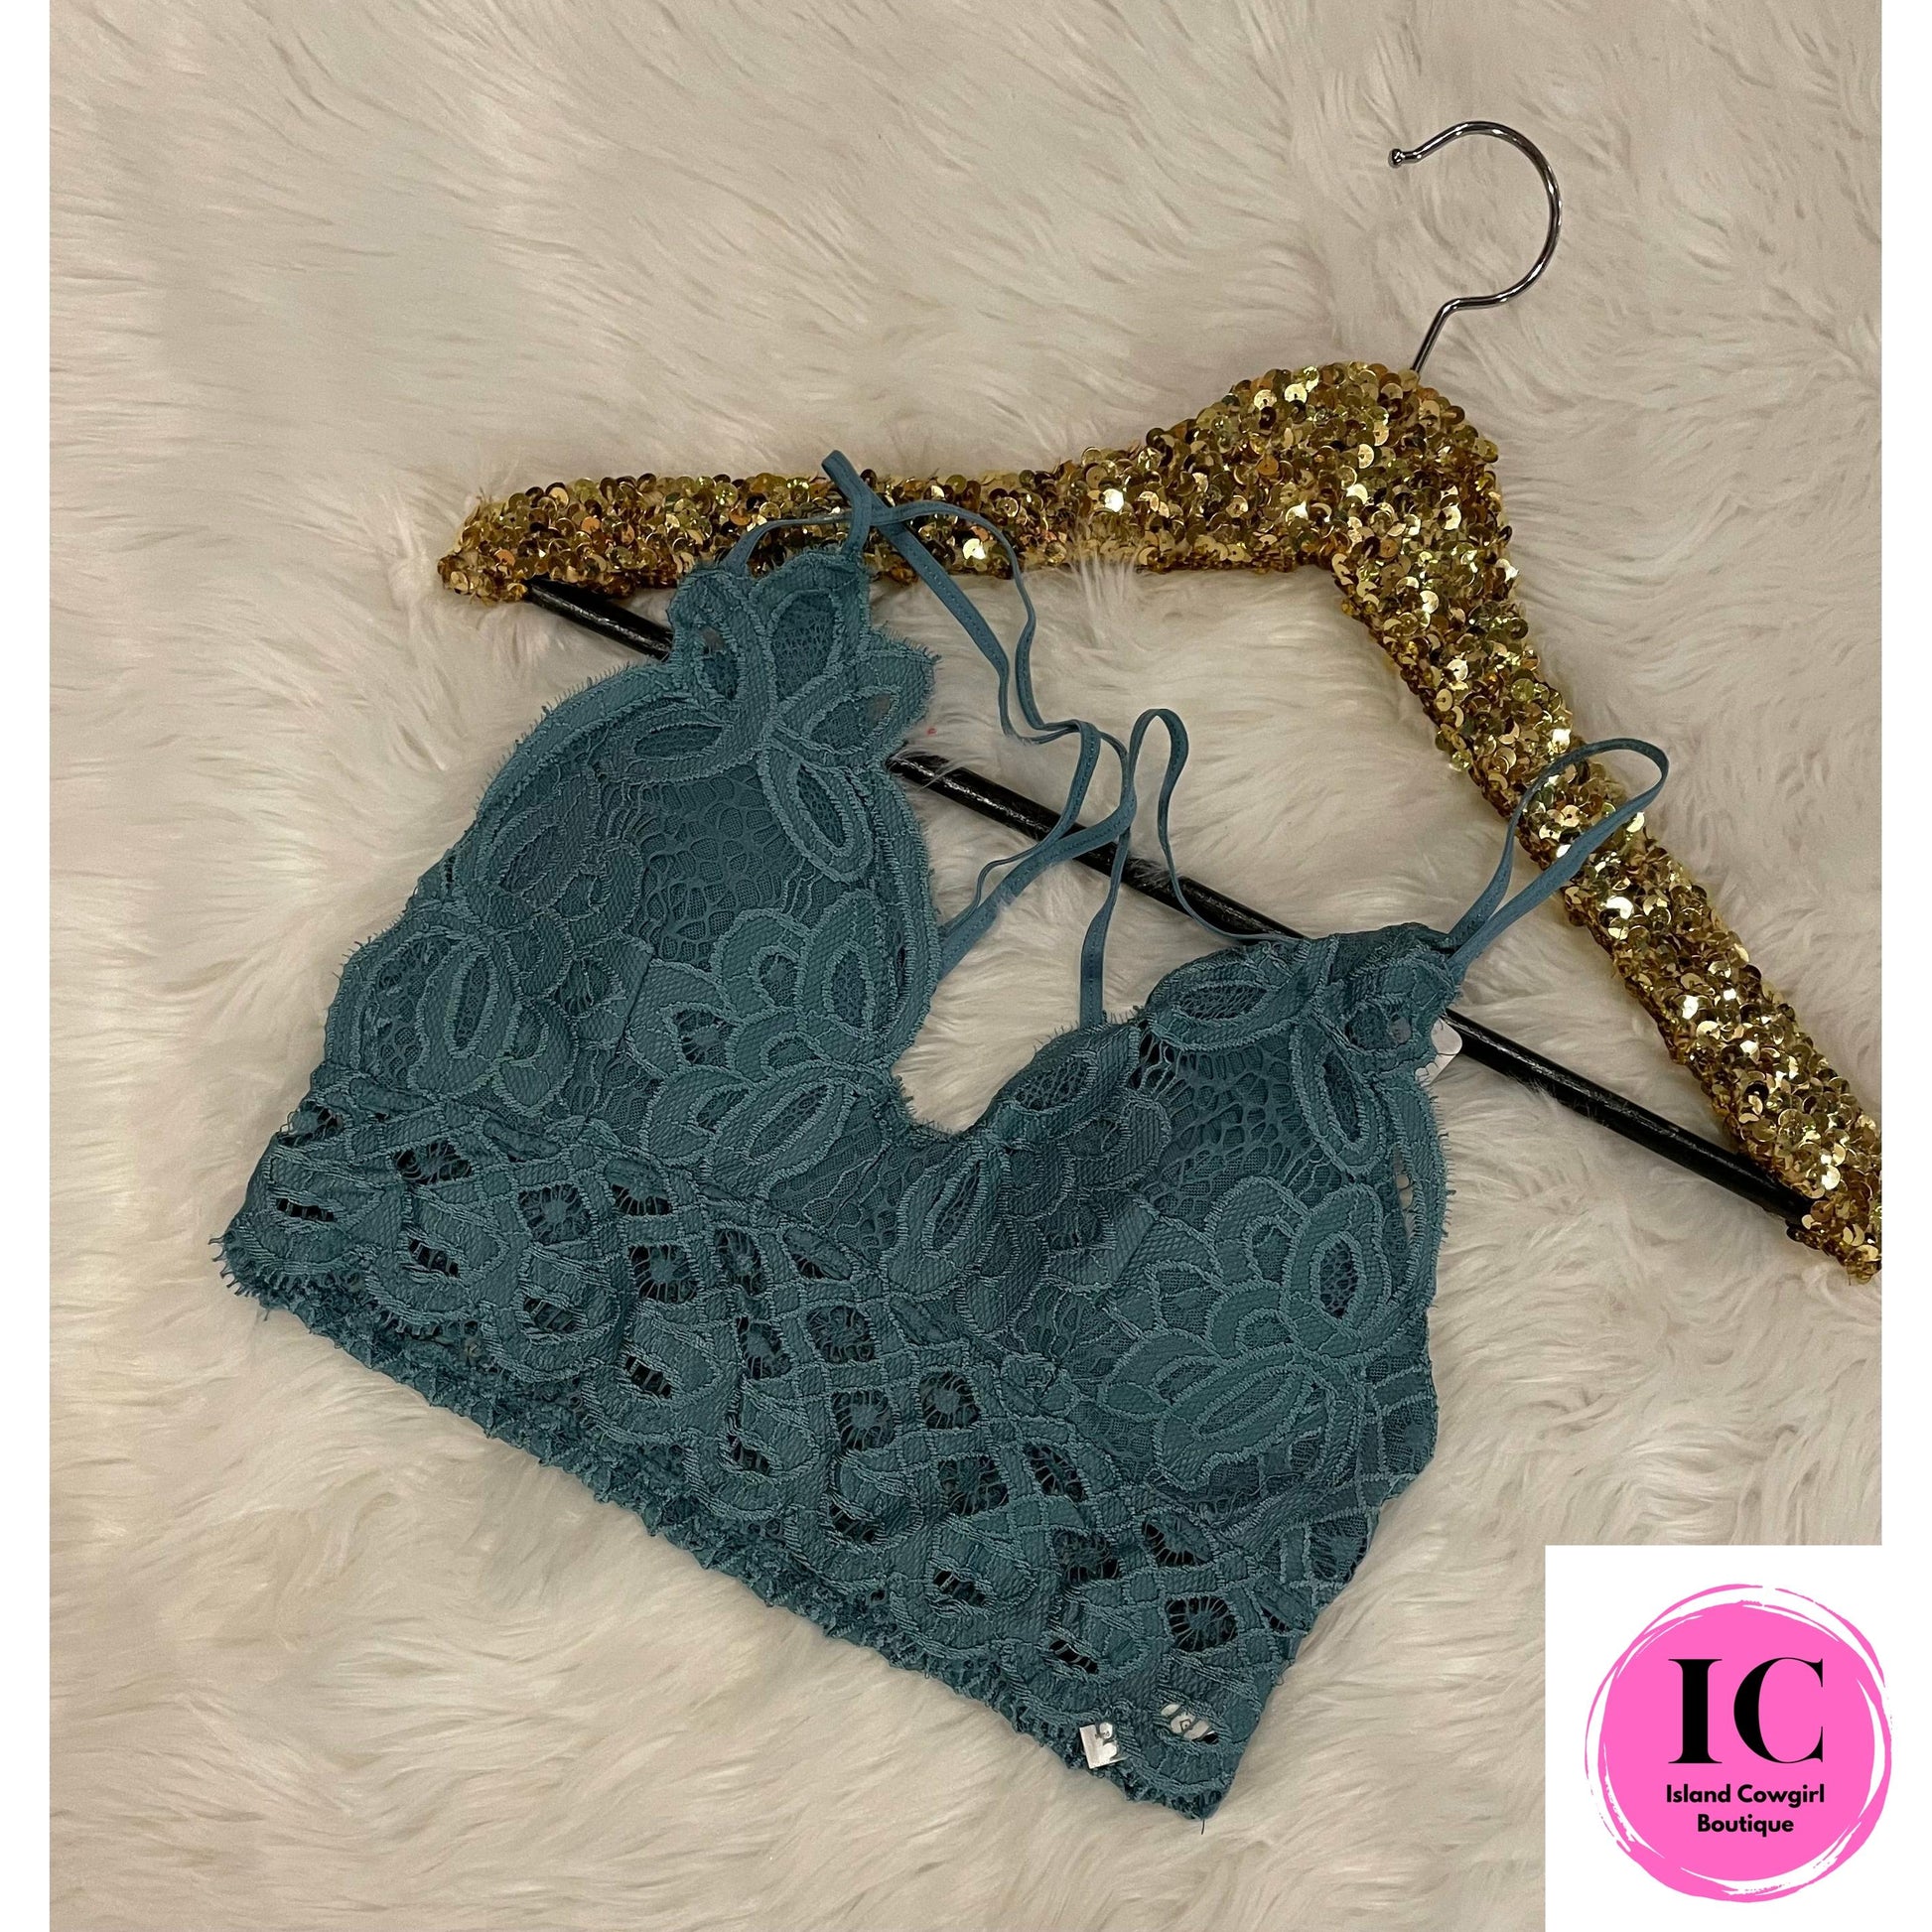 Crochet Lace Bralettes - Island Cowgirl Boutique